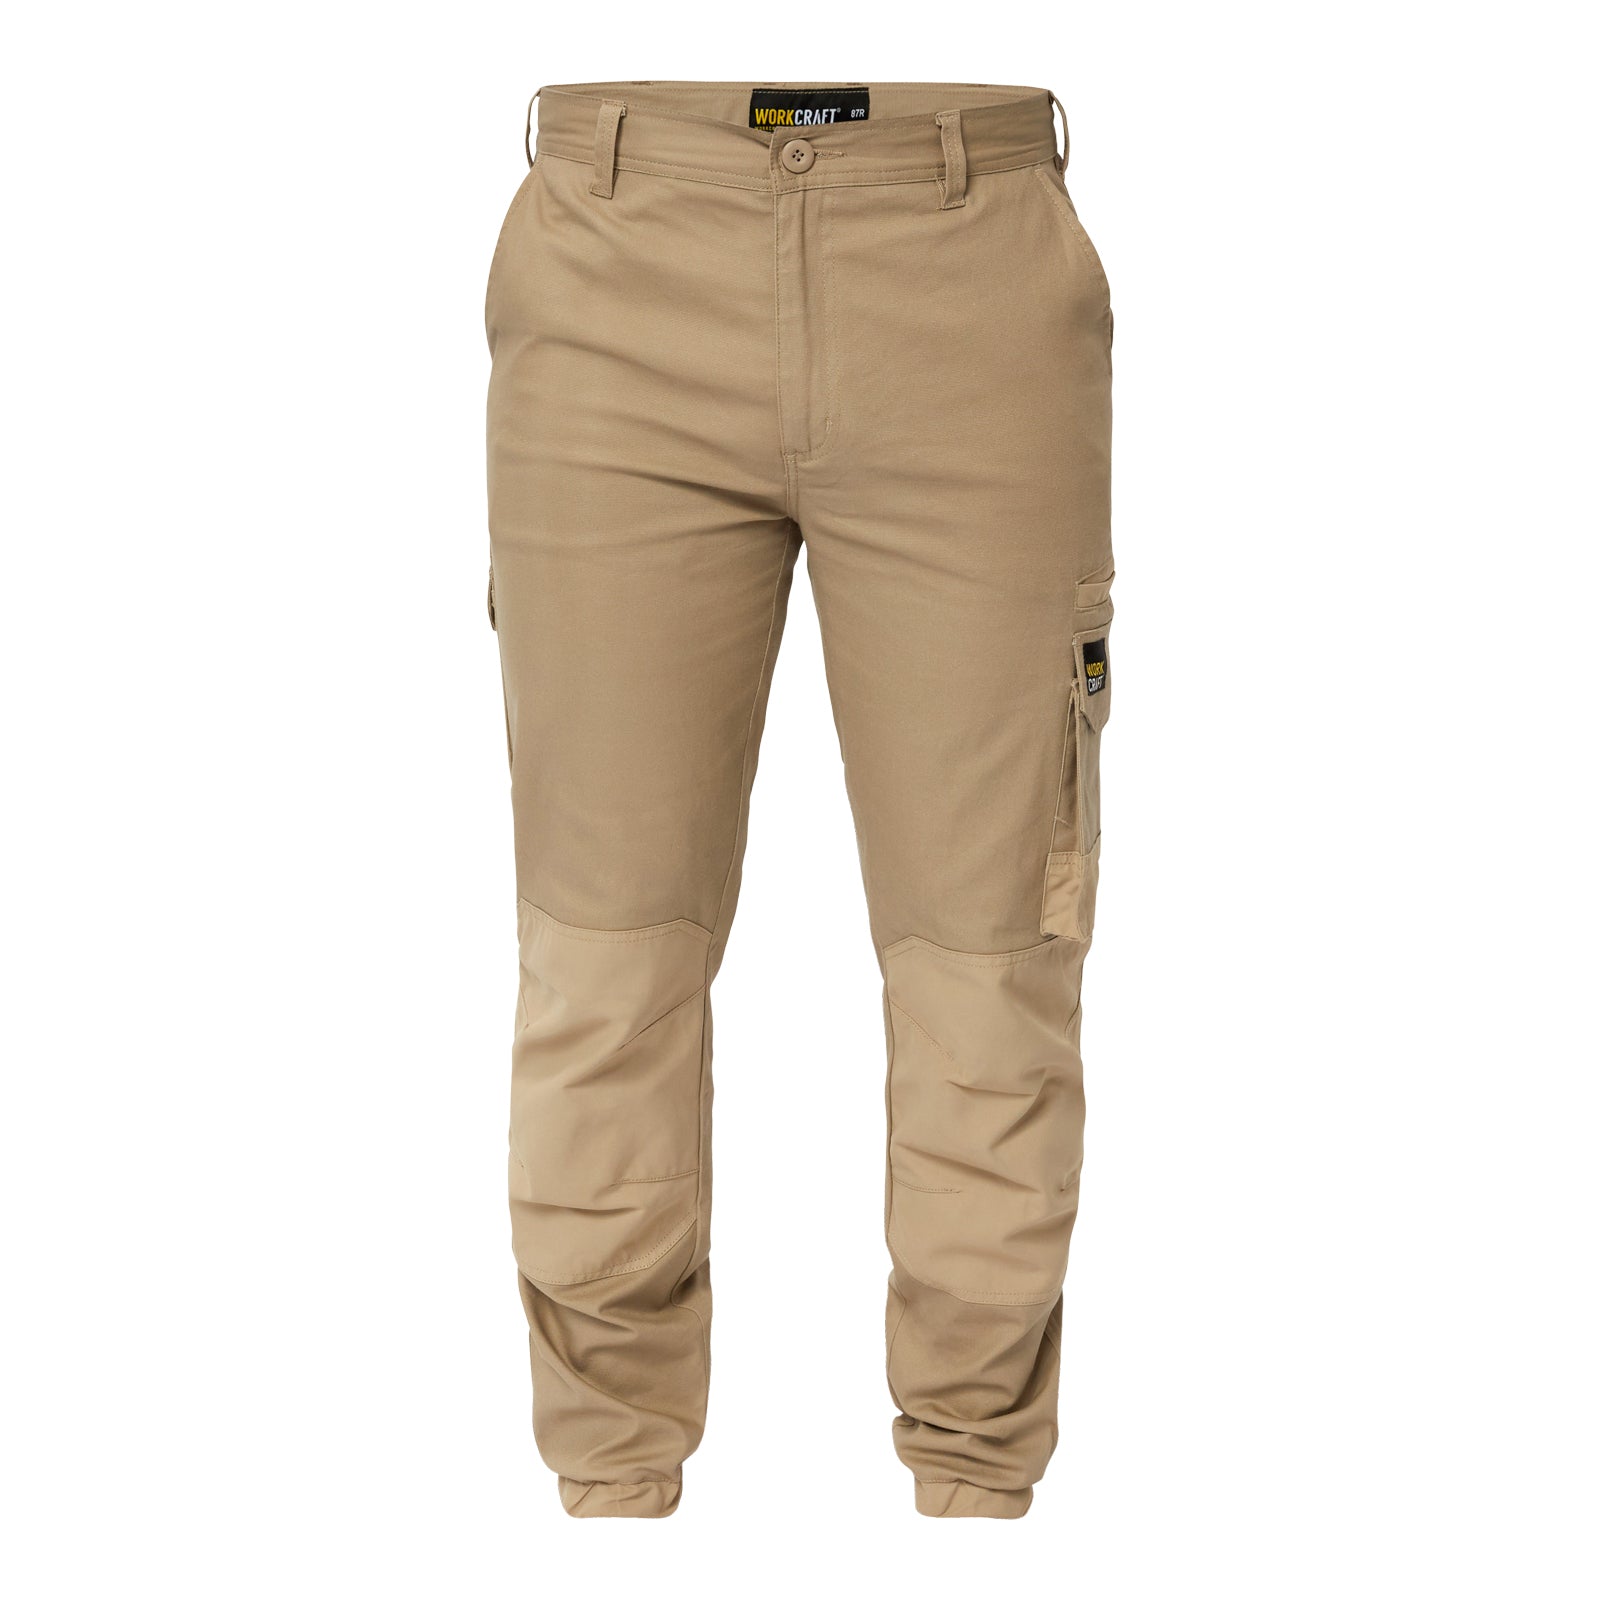 Stretched Cargo Pants with Elasticised Hem - made by Workcraft